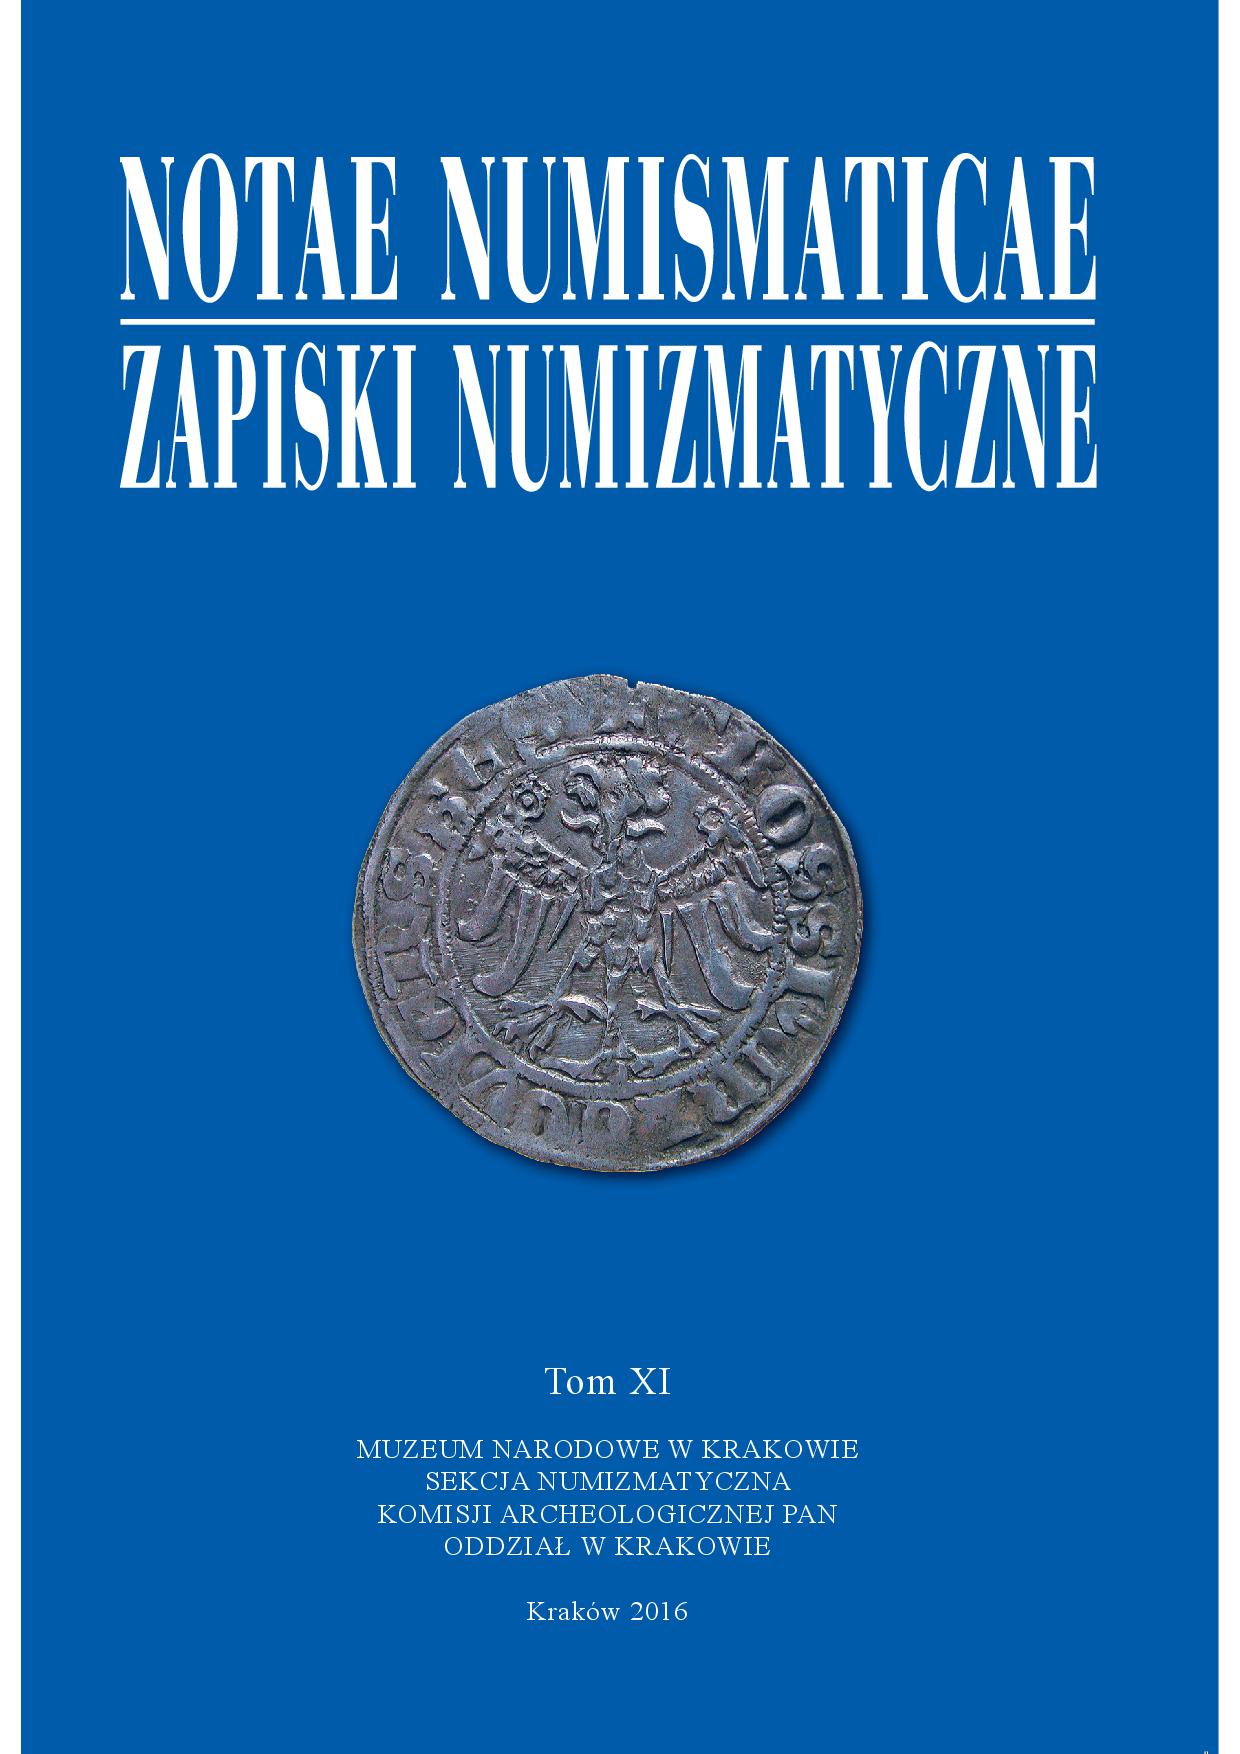 ADAM DEGLER Catalogue of Ancient Coins in the Ossoliński National Institute. Part 6: Coins of the Roman Empire: Pertinax–Severus Alexander. Ossoliński National Institute Publishing House, Wrocław 2016, 163 pages, 30 plates, appendix Cover Image